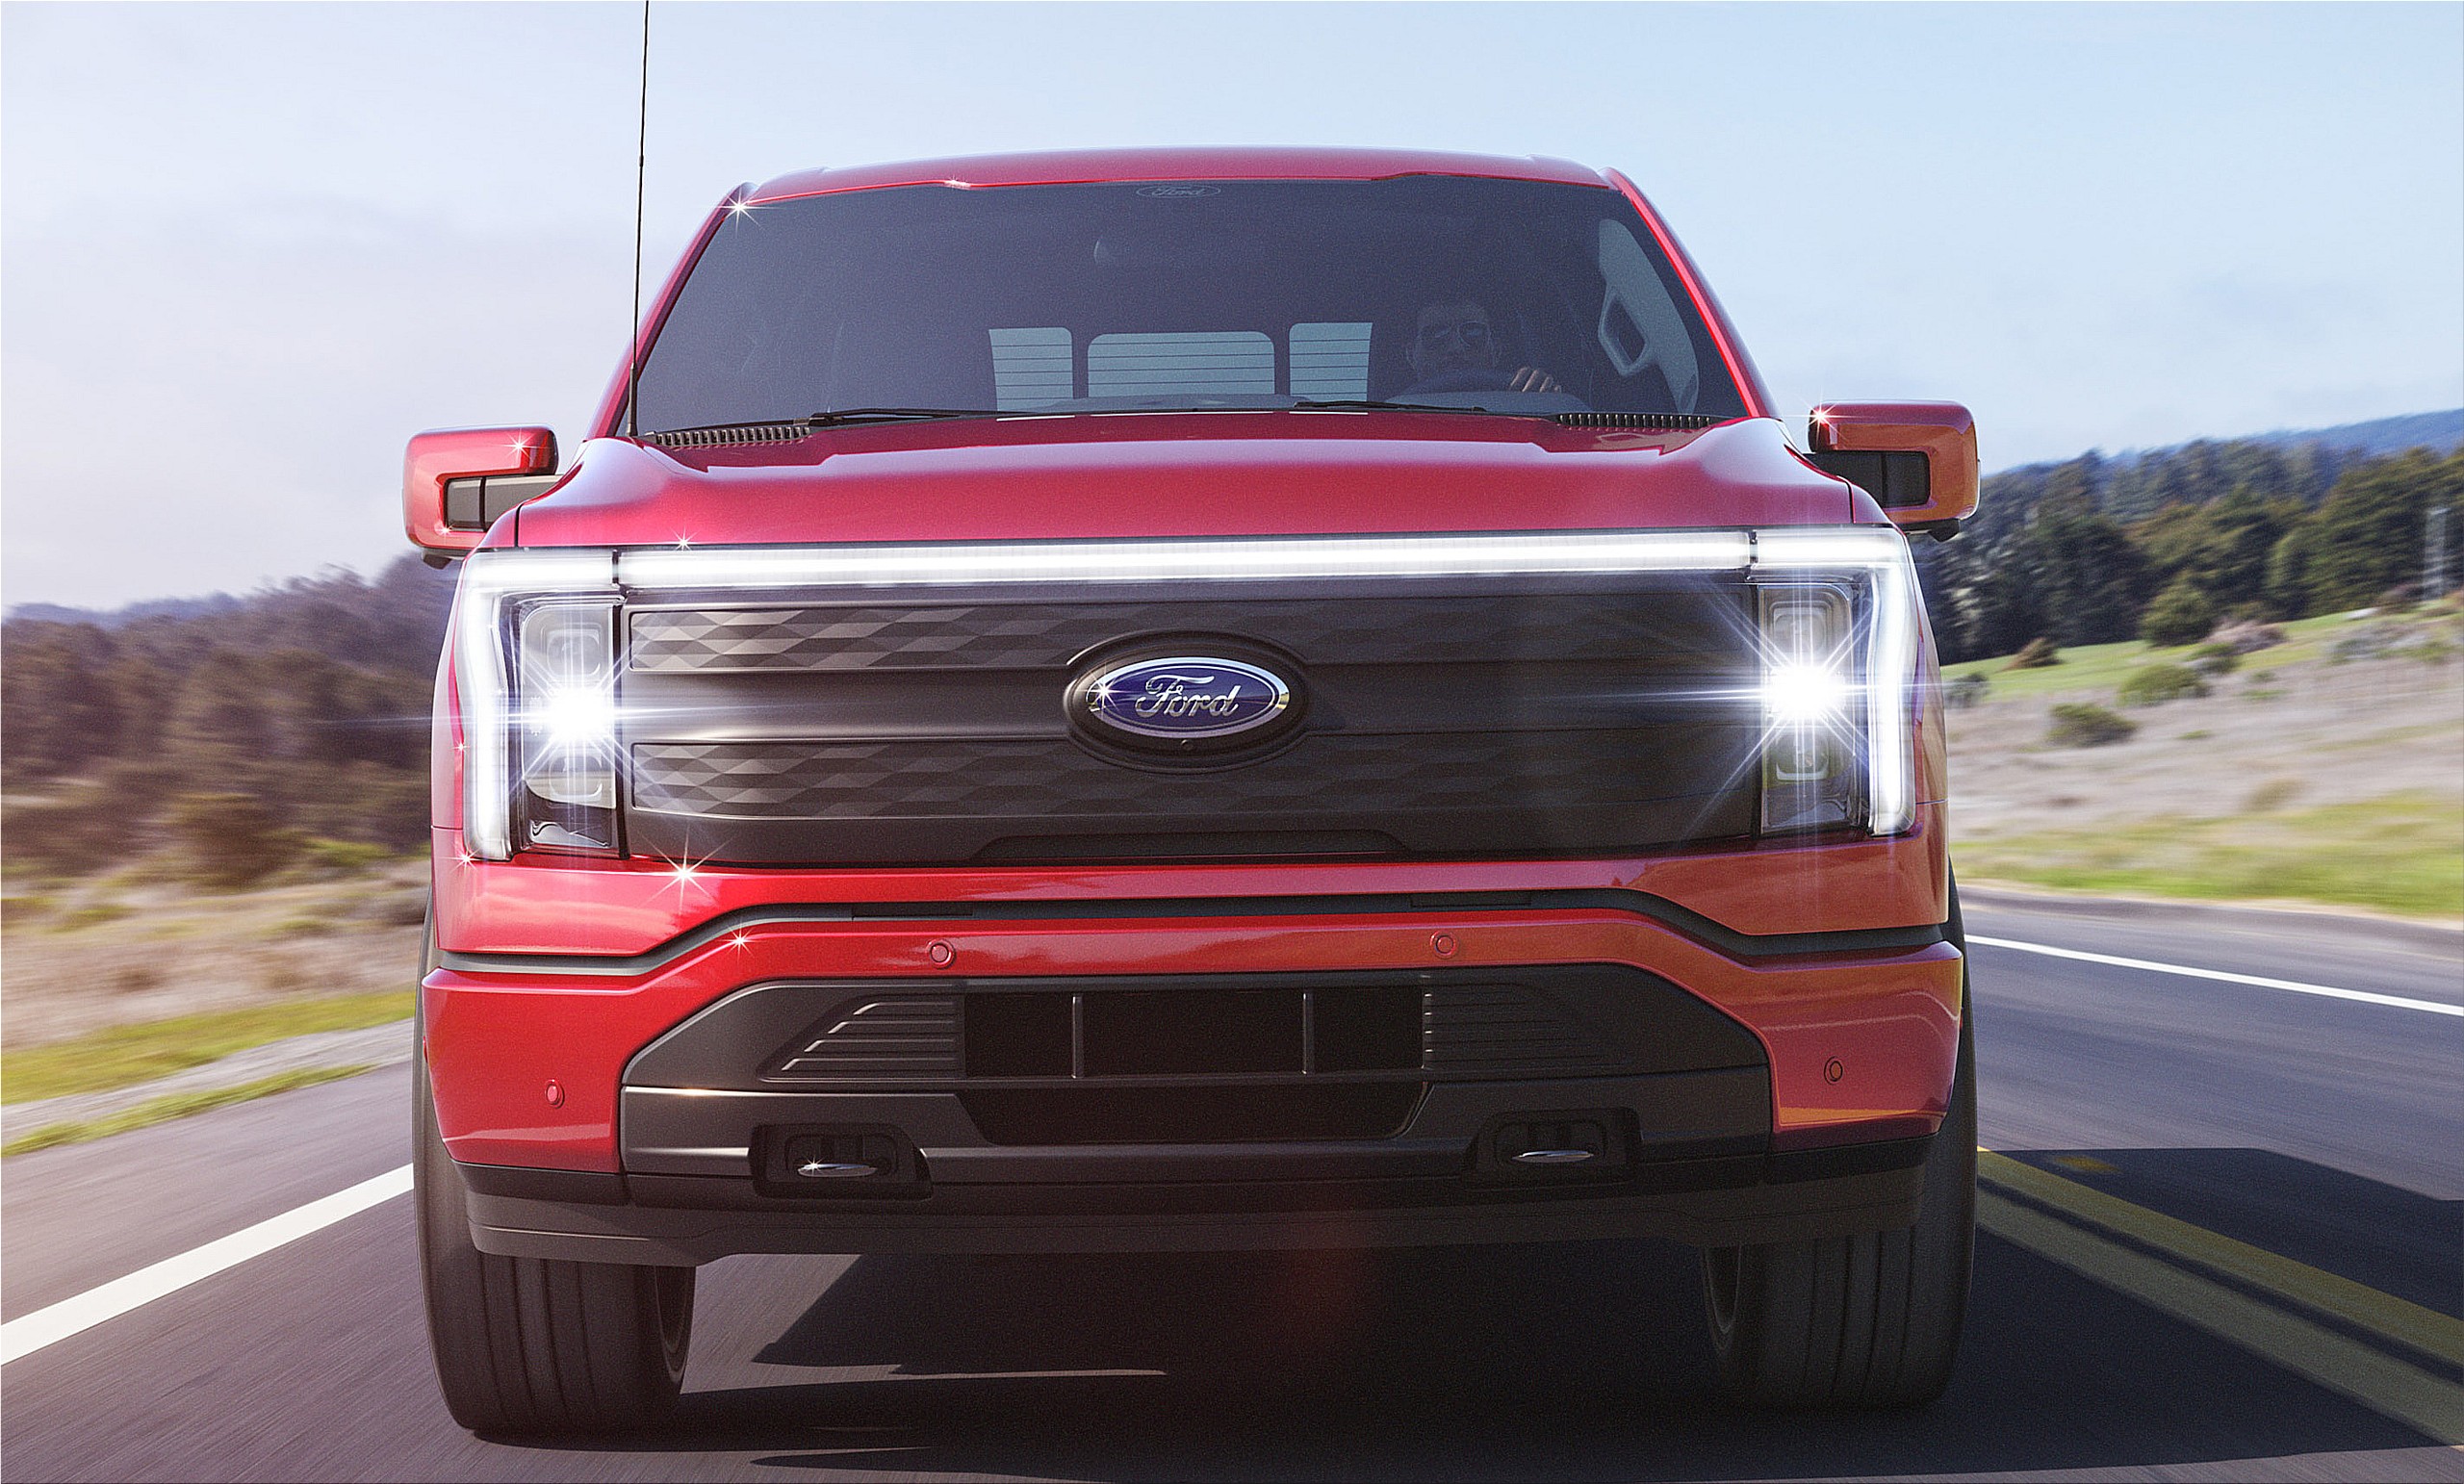 The new Ford F150 Lightning fully electric pickup from 39,000